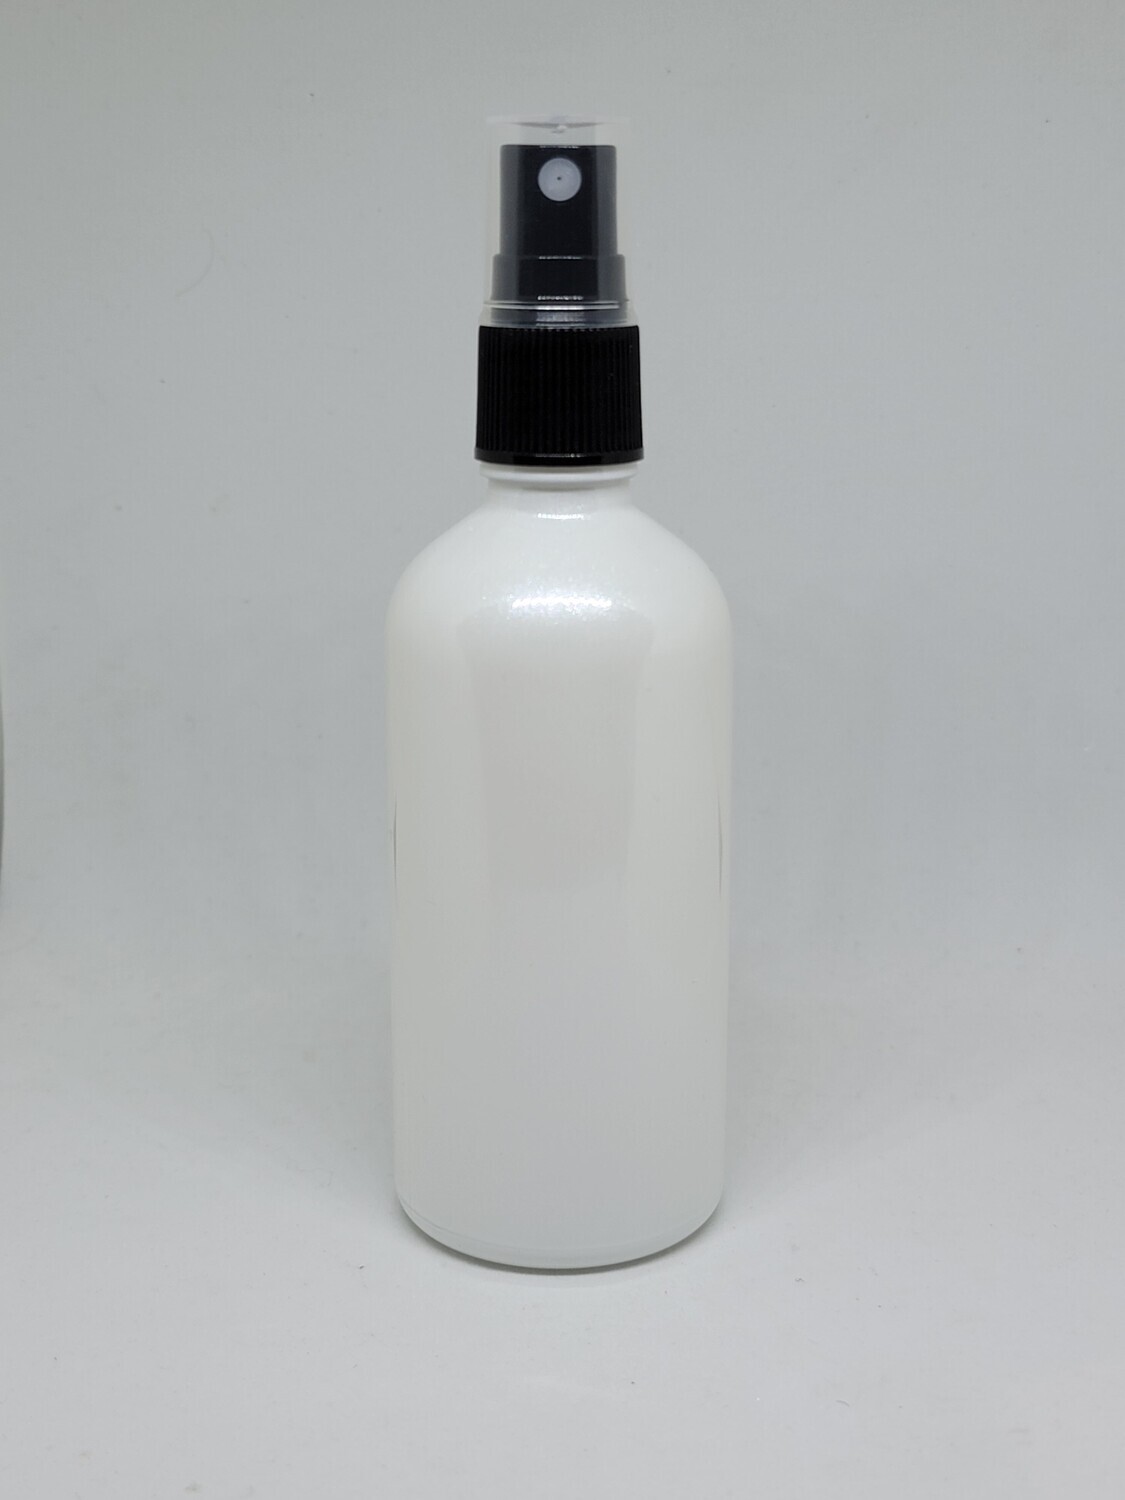 100ml WHITE (Coated Pearlized) GLASS Boston 18mm Neck Bottle + BLACK SPRITZER/ ATOMISER with over cap- Single